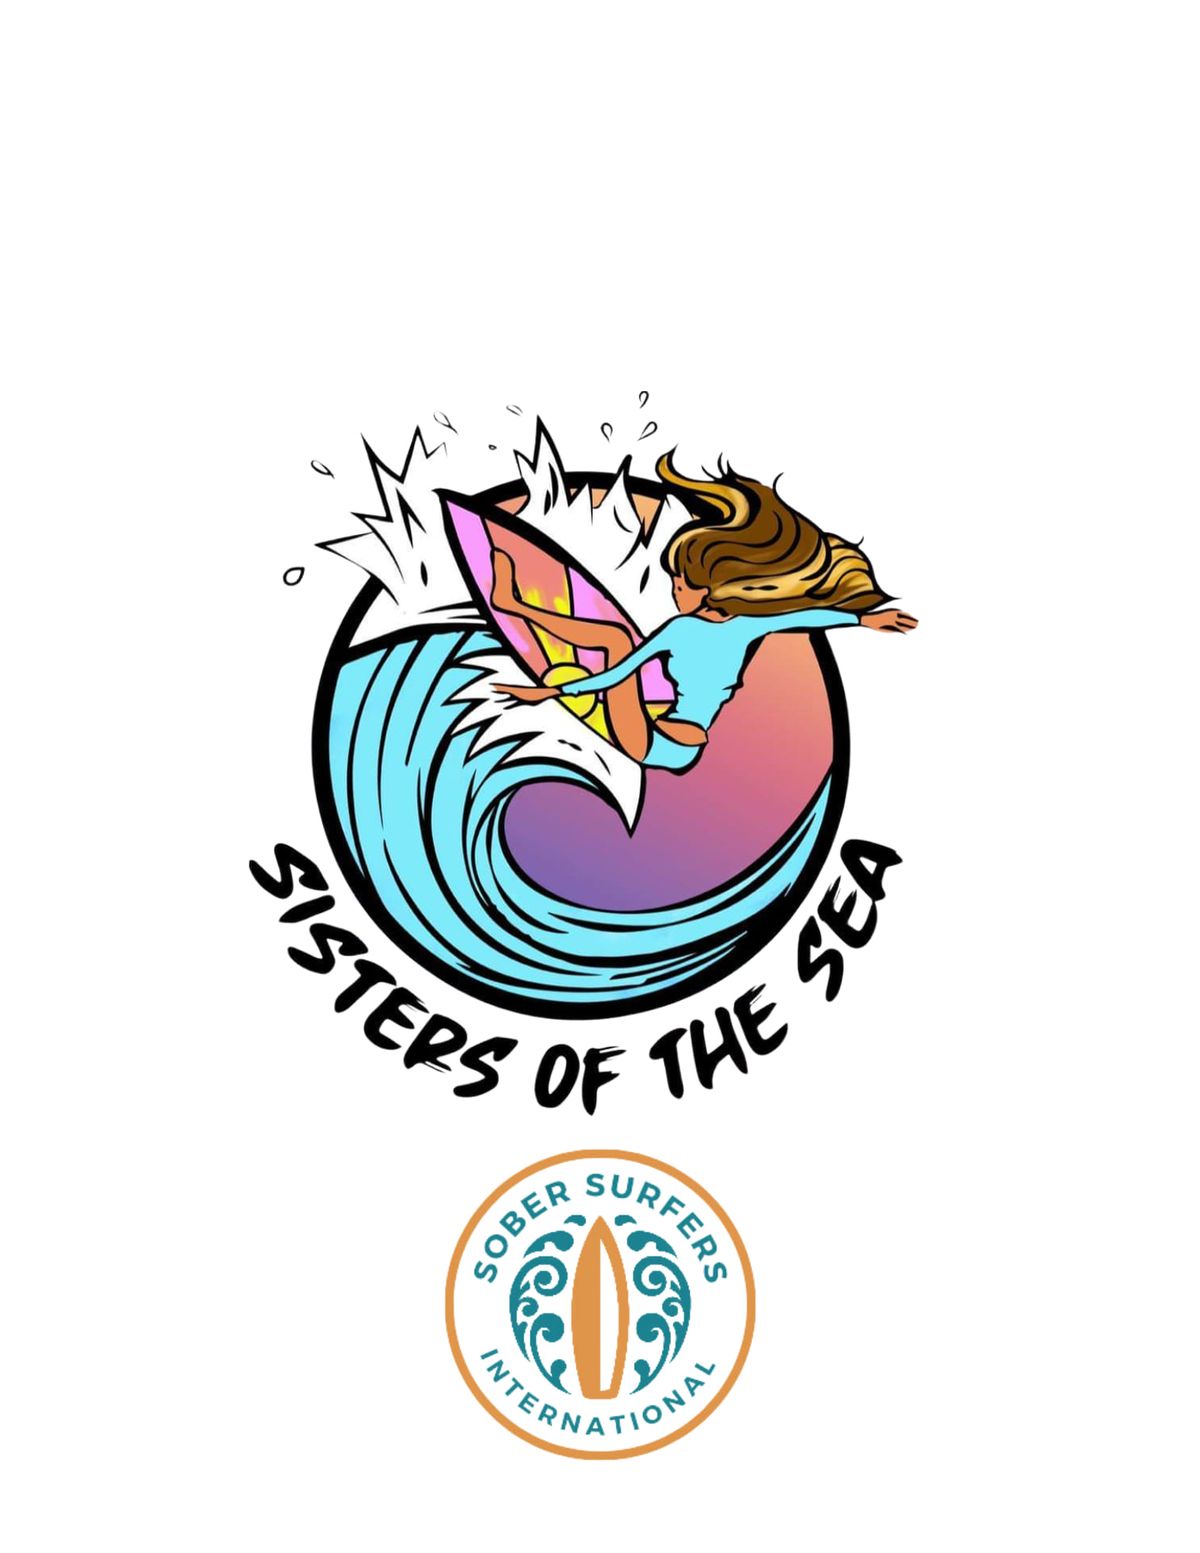 Sober Surfers International Compete at Sisters of the Sea 26th annual Surf Classic